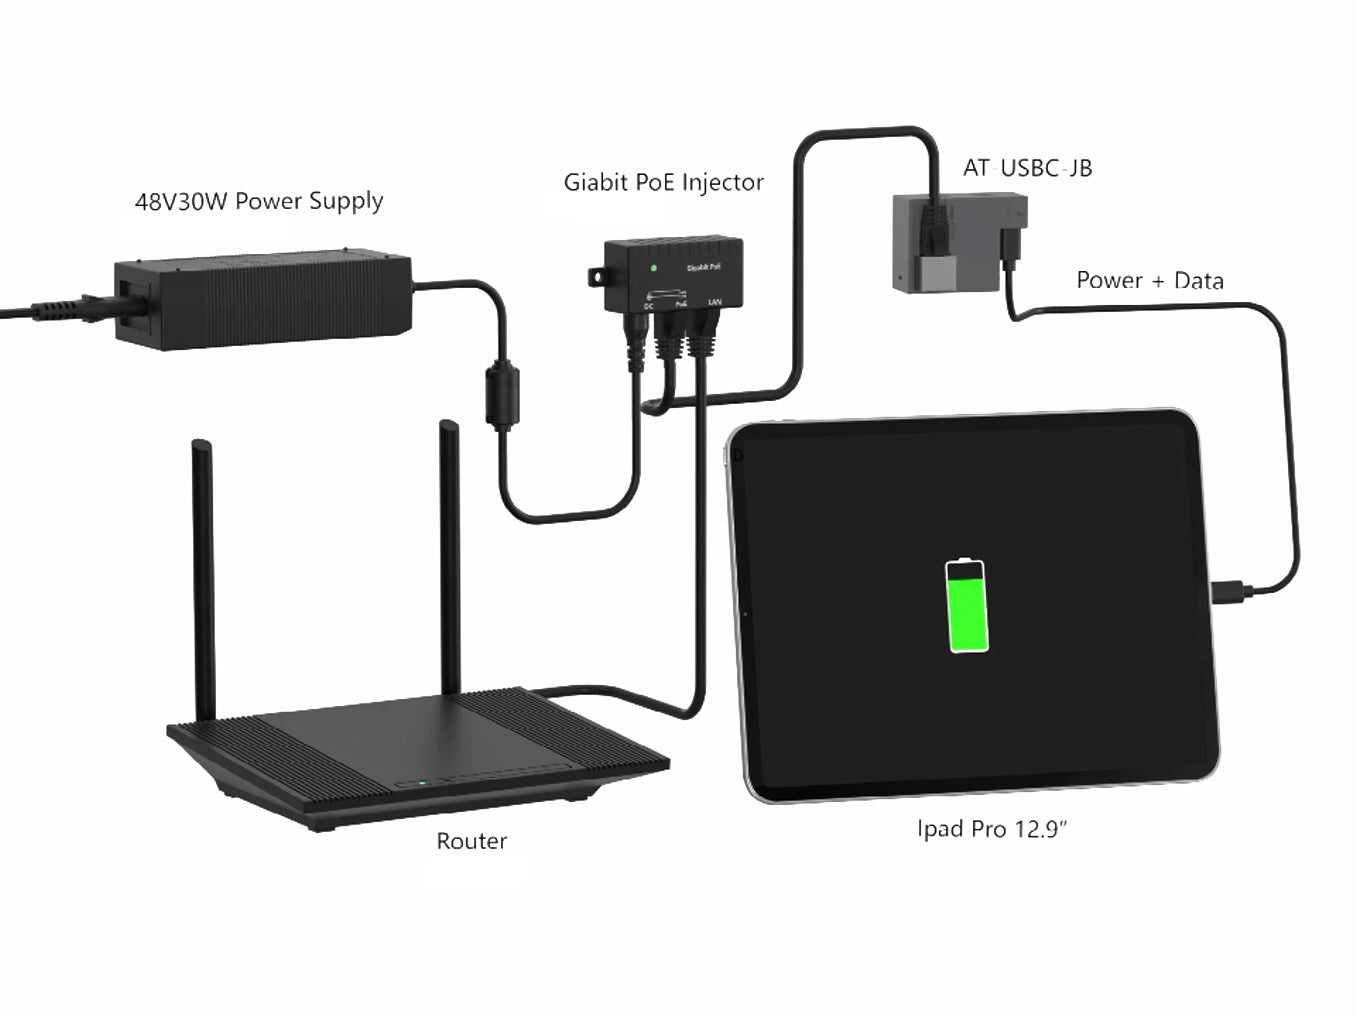 AT-USBC-JB POE+ USB-C Deliver Power& Data With Two USBC Function In Euro Box for Tablet Surface Go, IPAD Pro, Type-C Device